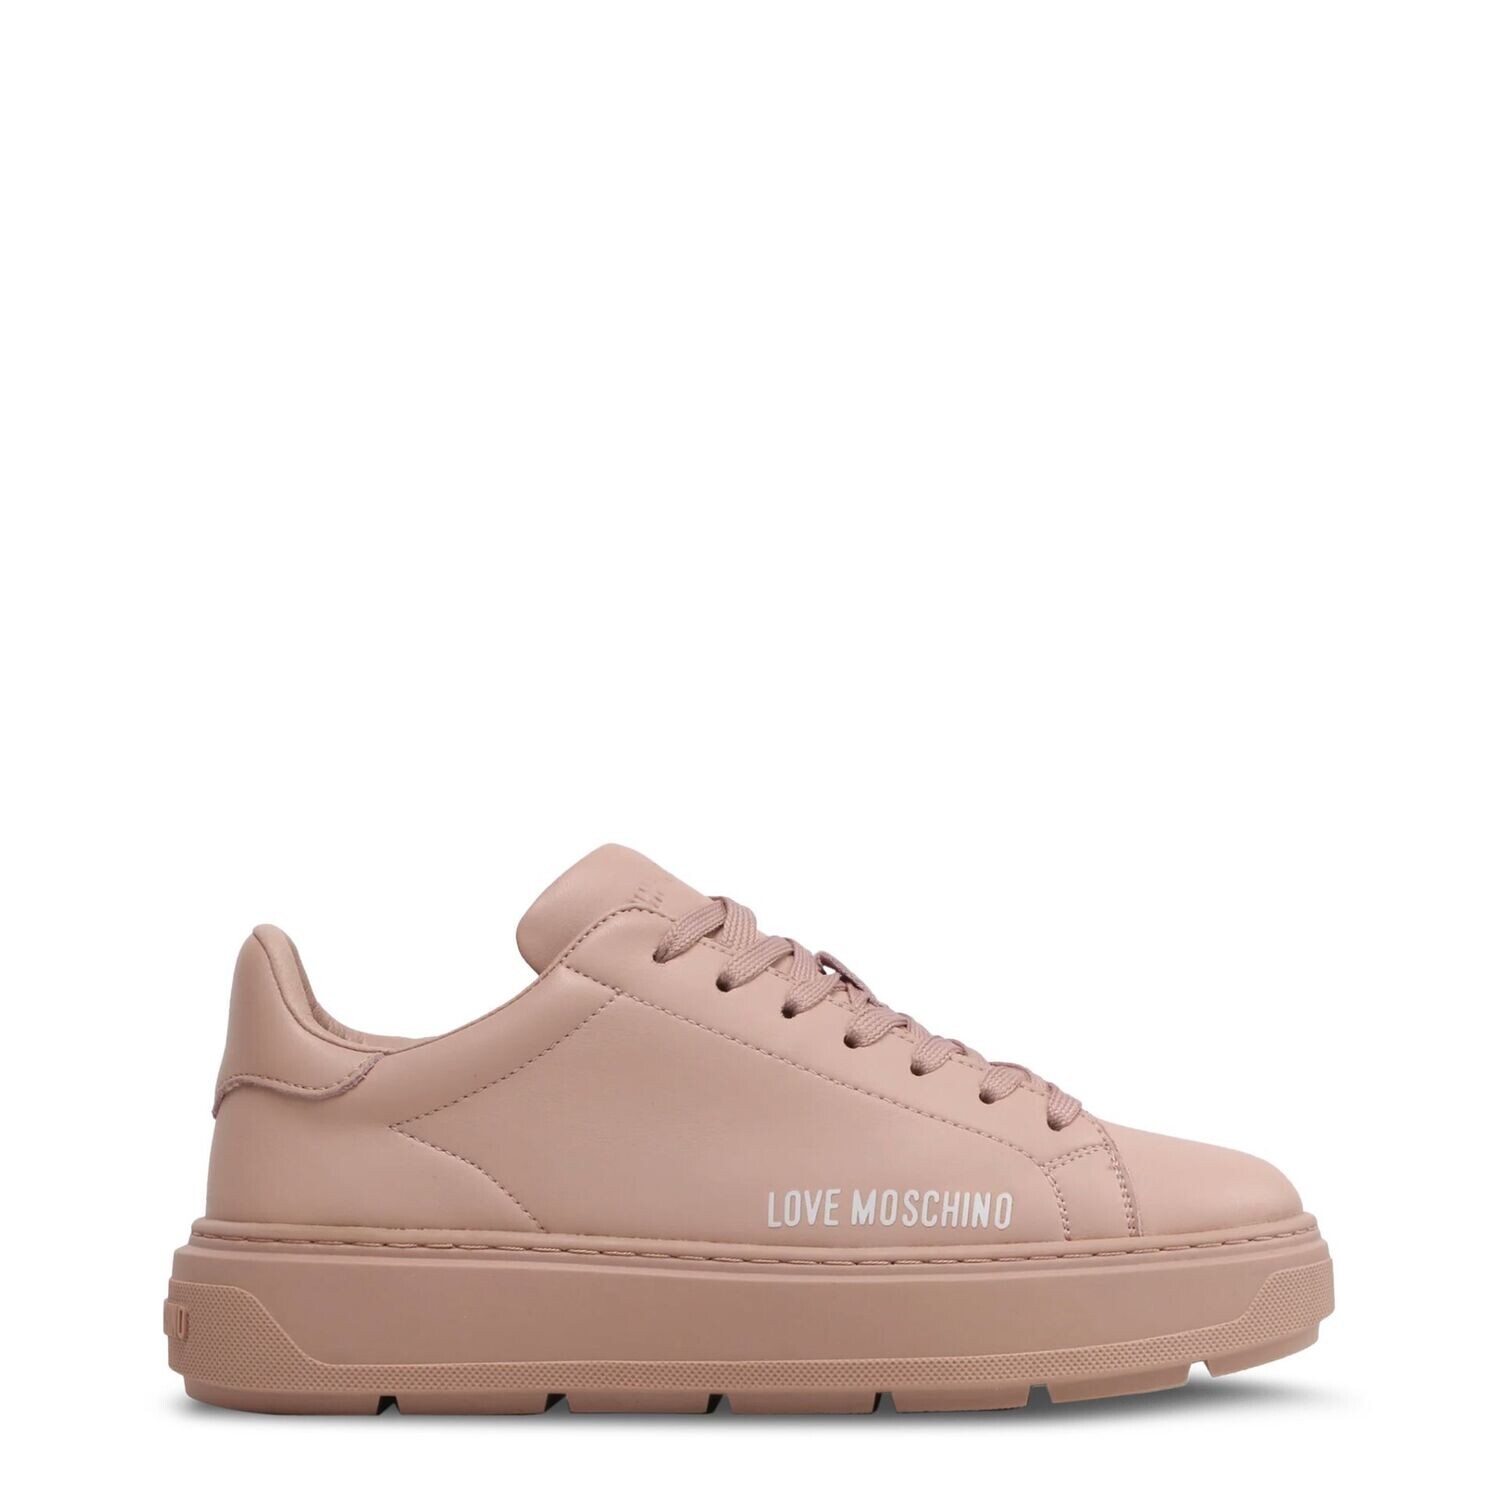 Love Moschino Solid Trainers, size: EU 36